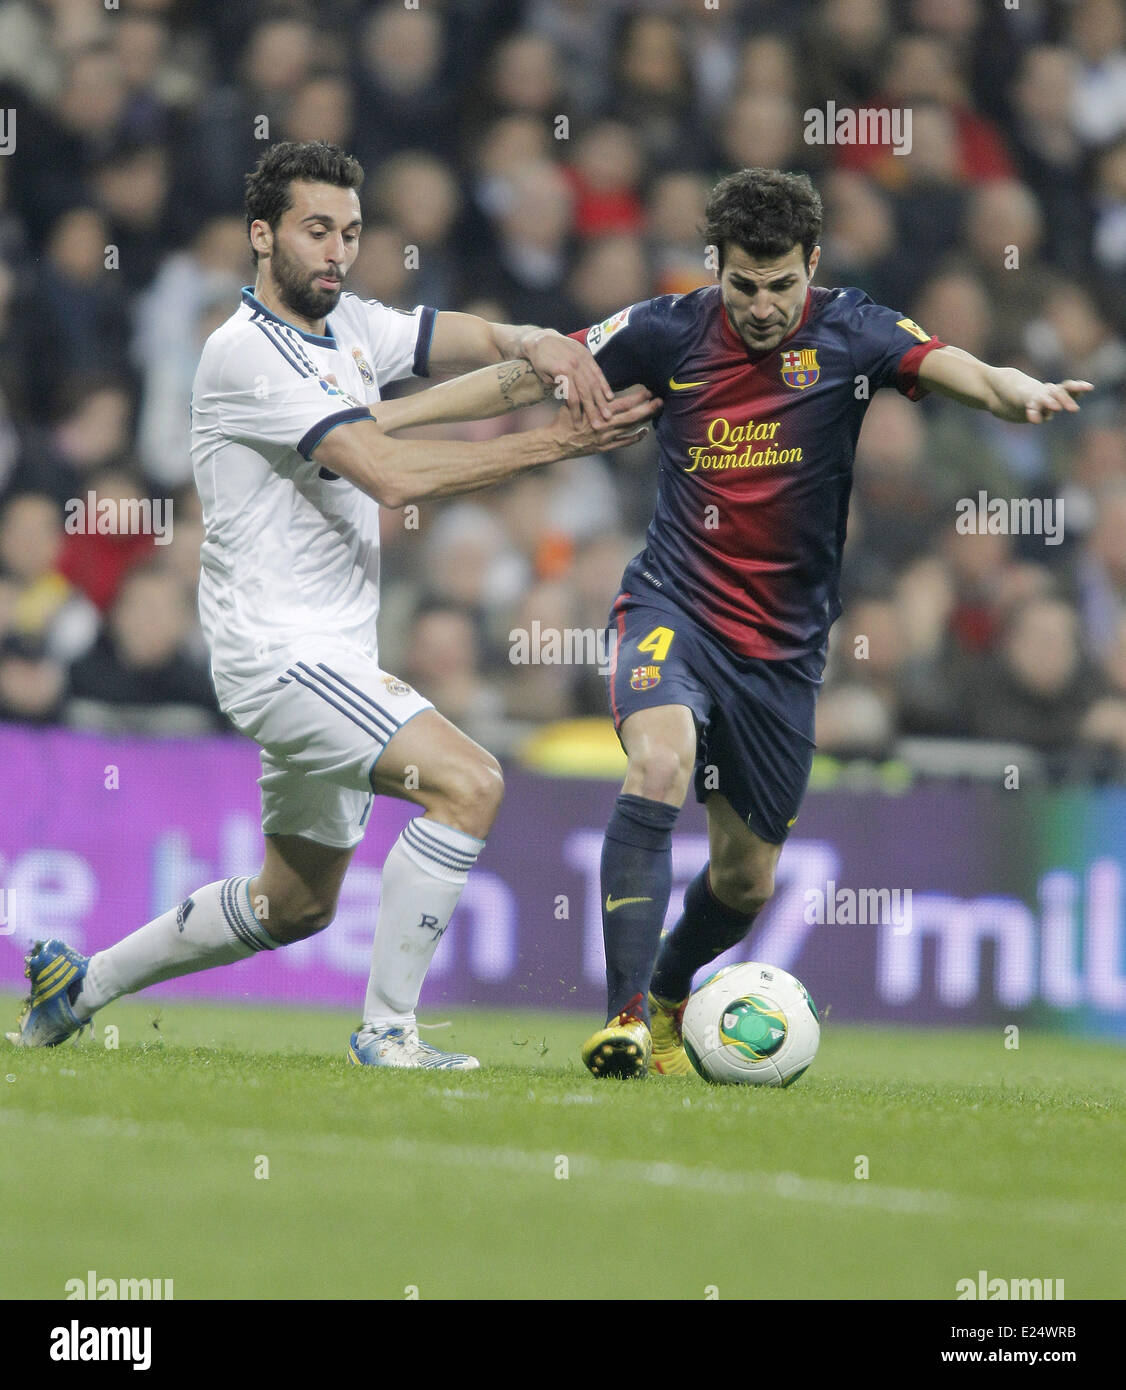 Real Madrid welcome Barcelona FC to the Santiago Bernabeu stadium in the Copa del Rey Semi-Final 1st leg. The match finished 1-1.  Featuring: Alvaro Arbeloa,Cesc Fabregas Where: Madrid, Spain When: 30 Jan 2013 Stock Photo